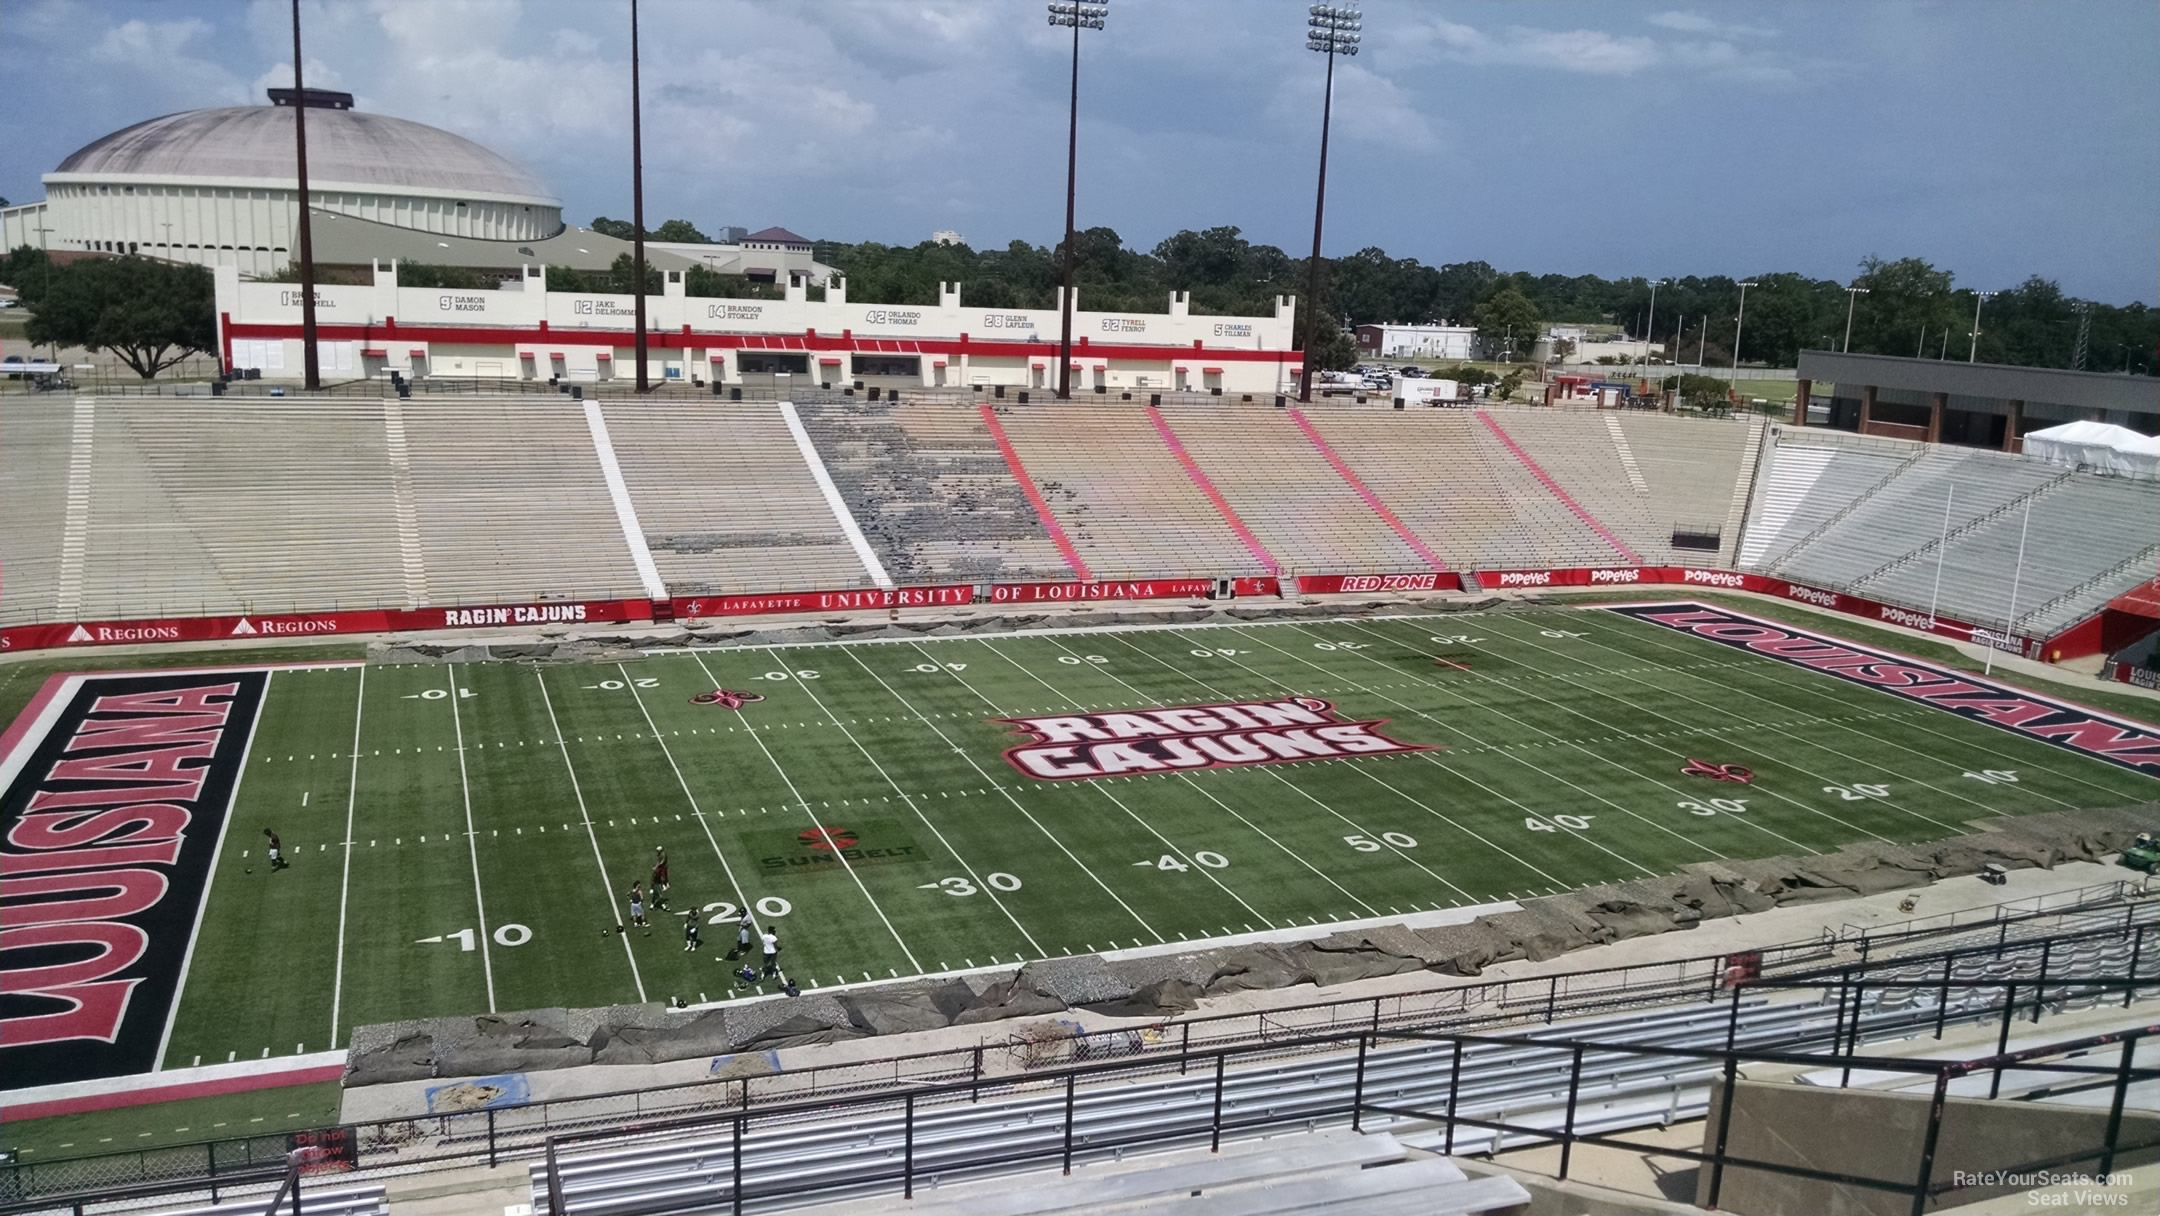 section ff, row 21 seat view  - cajun field